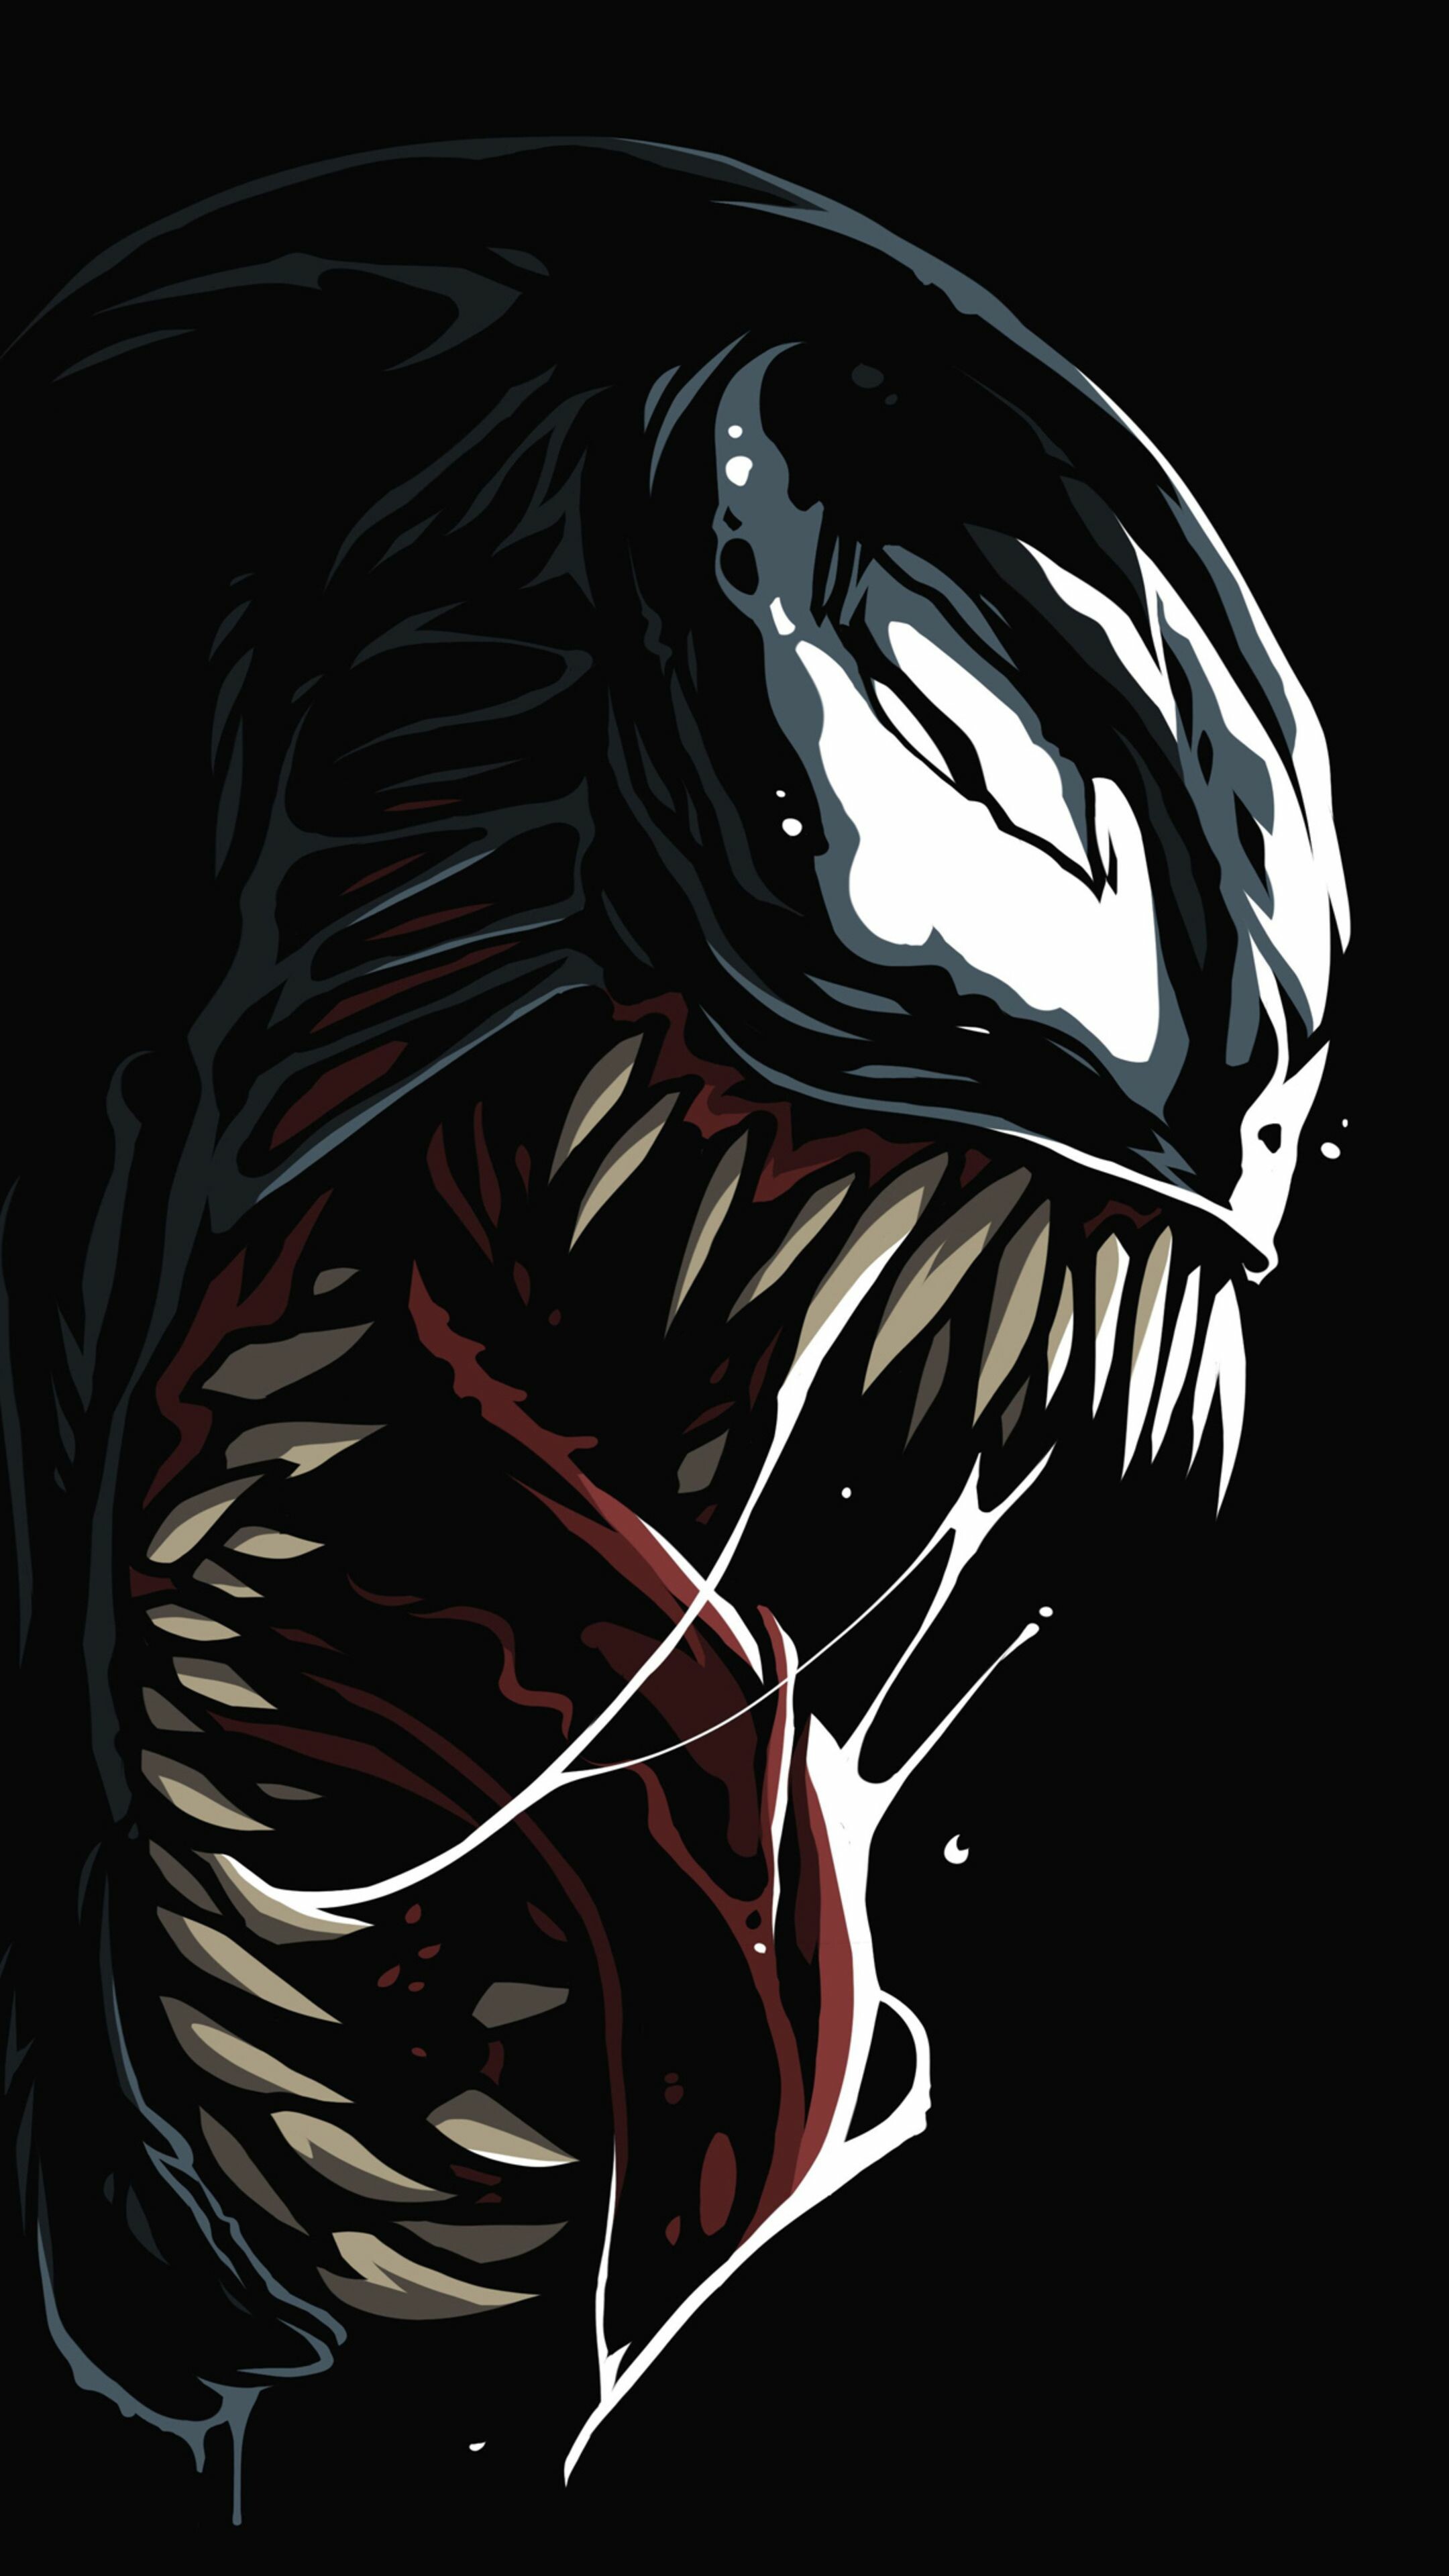 Venom: The character is a sentient alien symbiote with an amorphous, liquid-like form. 2160x3840 4K Wallpaper.